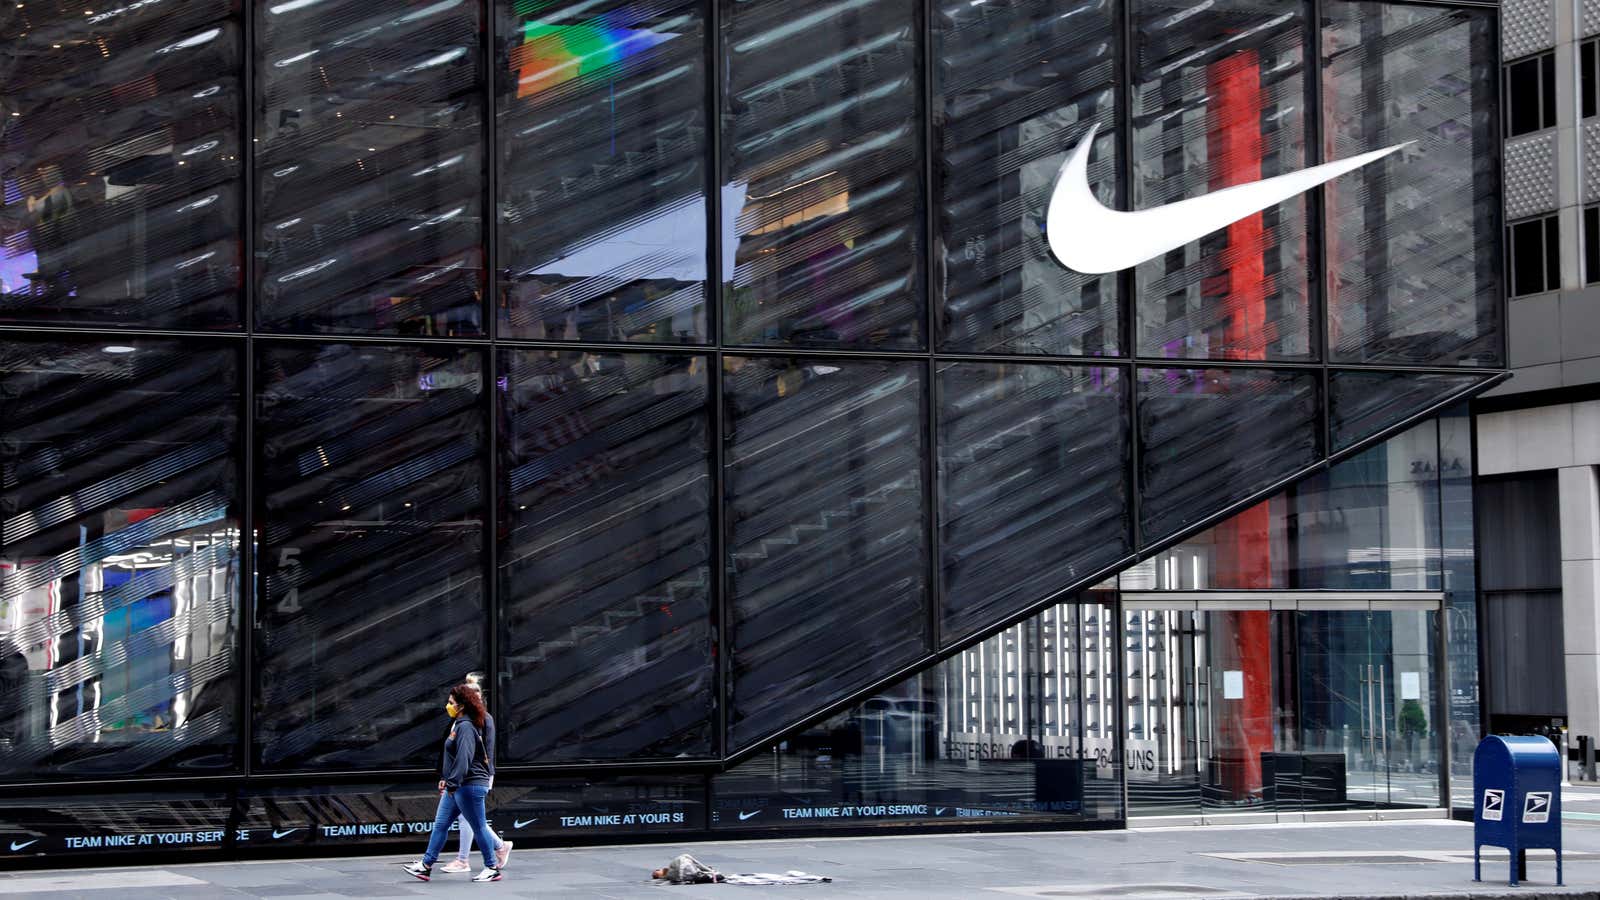 Sales at normally resilient Nike plunged due to Covid-19